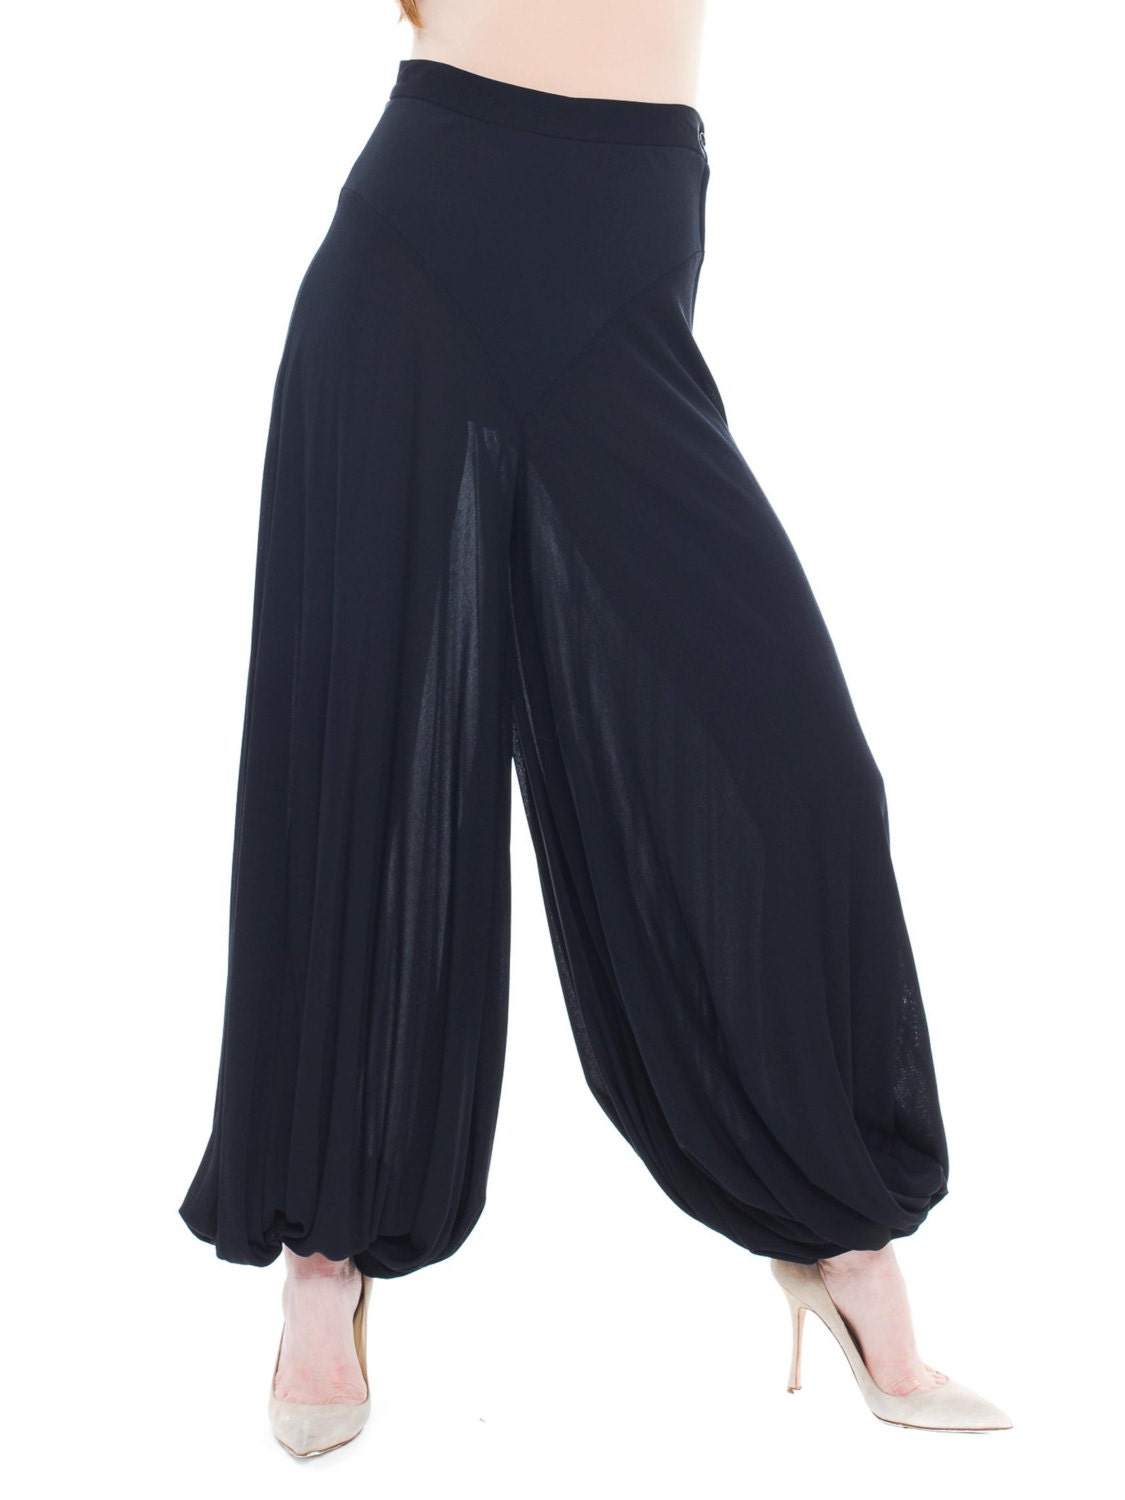 1970s Vintage Chic Artistic and Sexy Black Harem Pants by